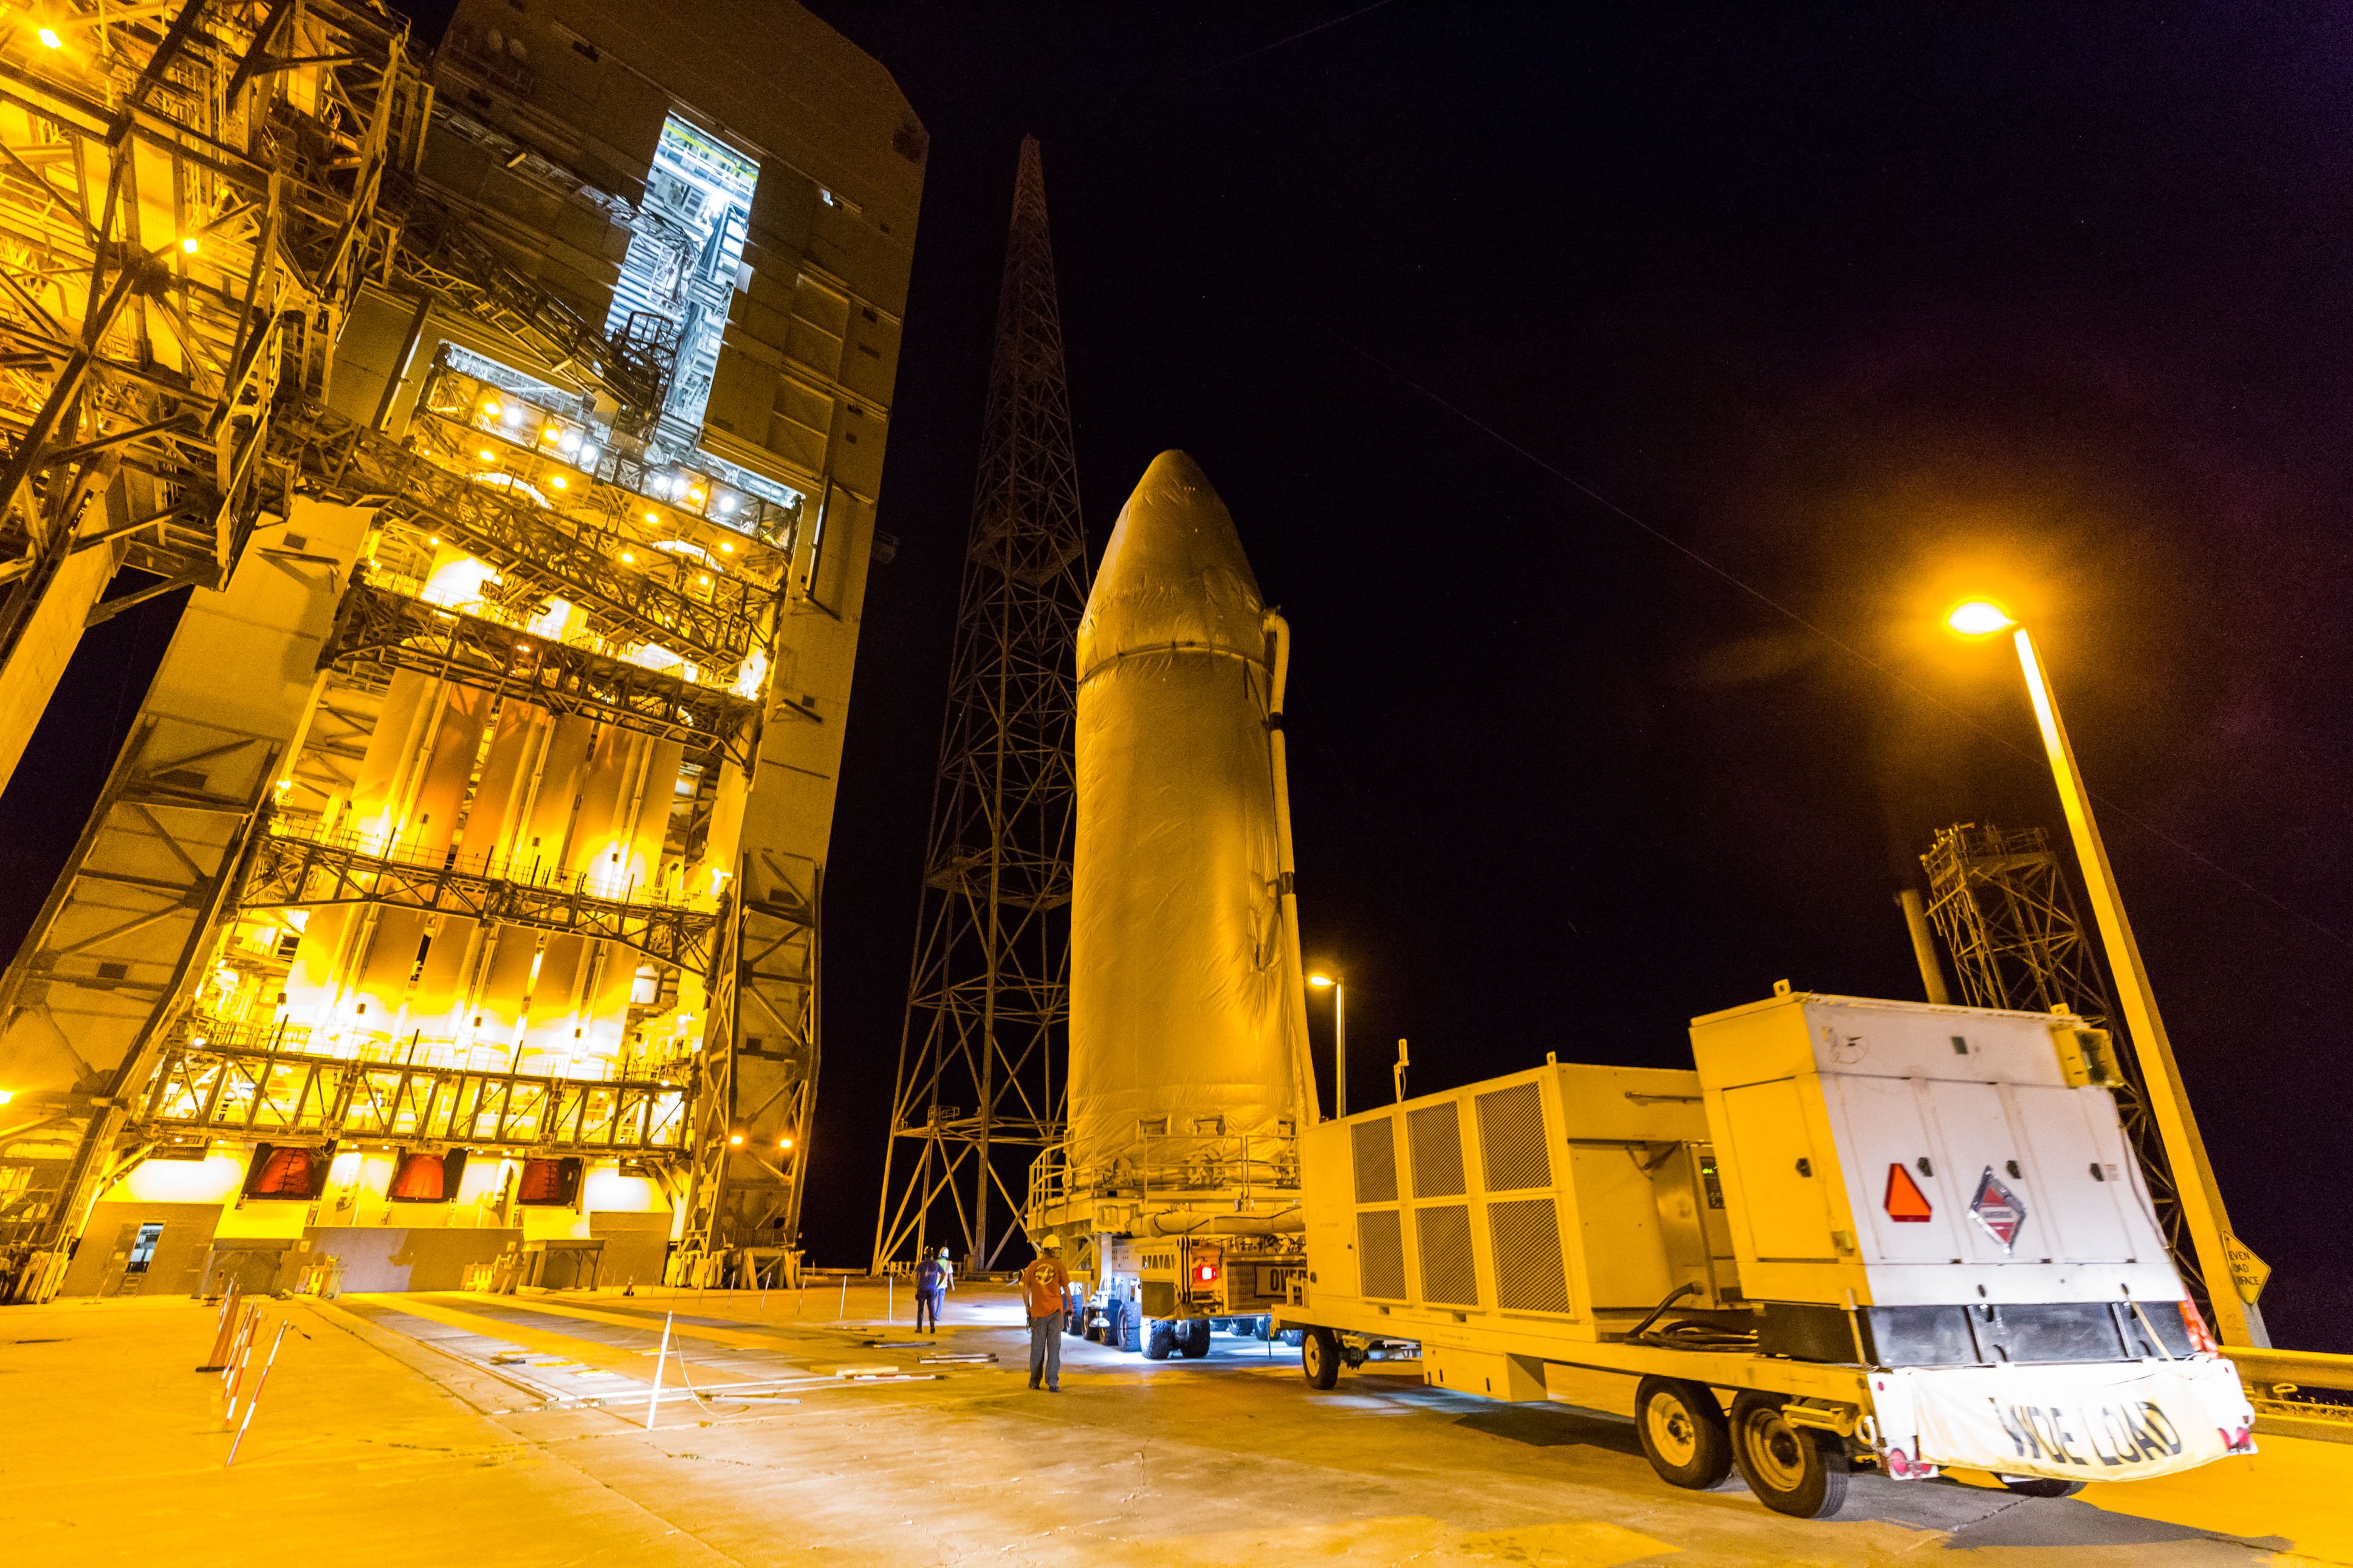 NROL-68: Delta IV Heavy readied for national security launch